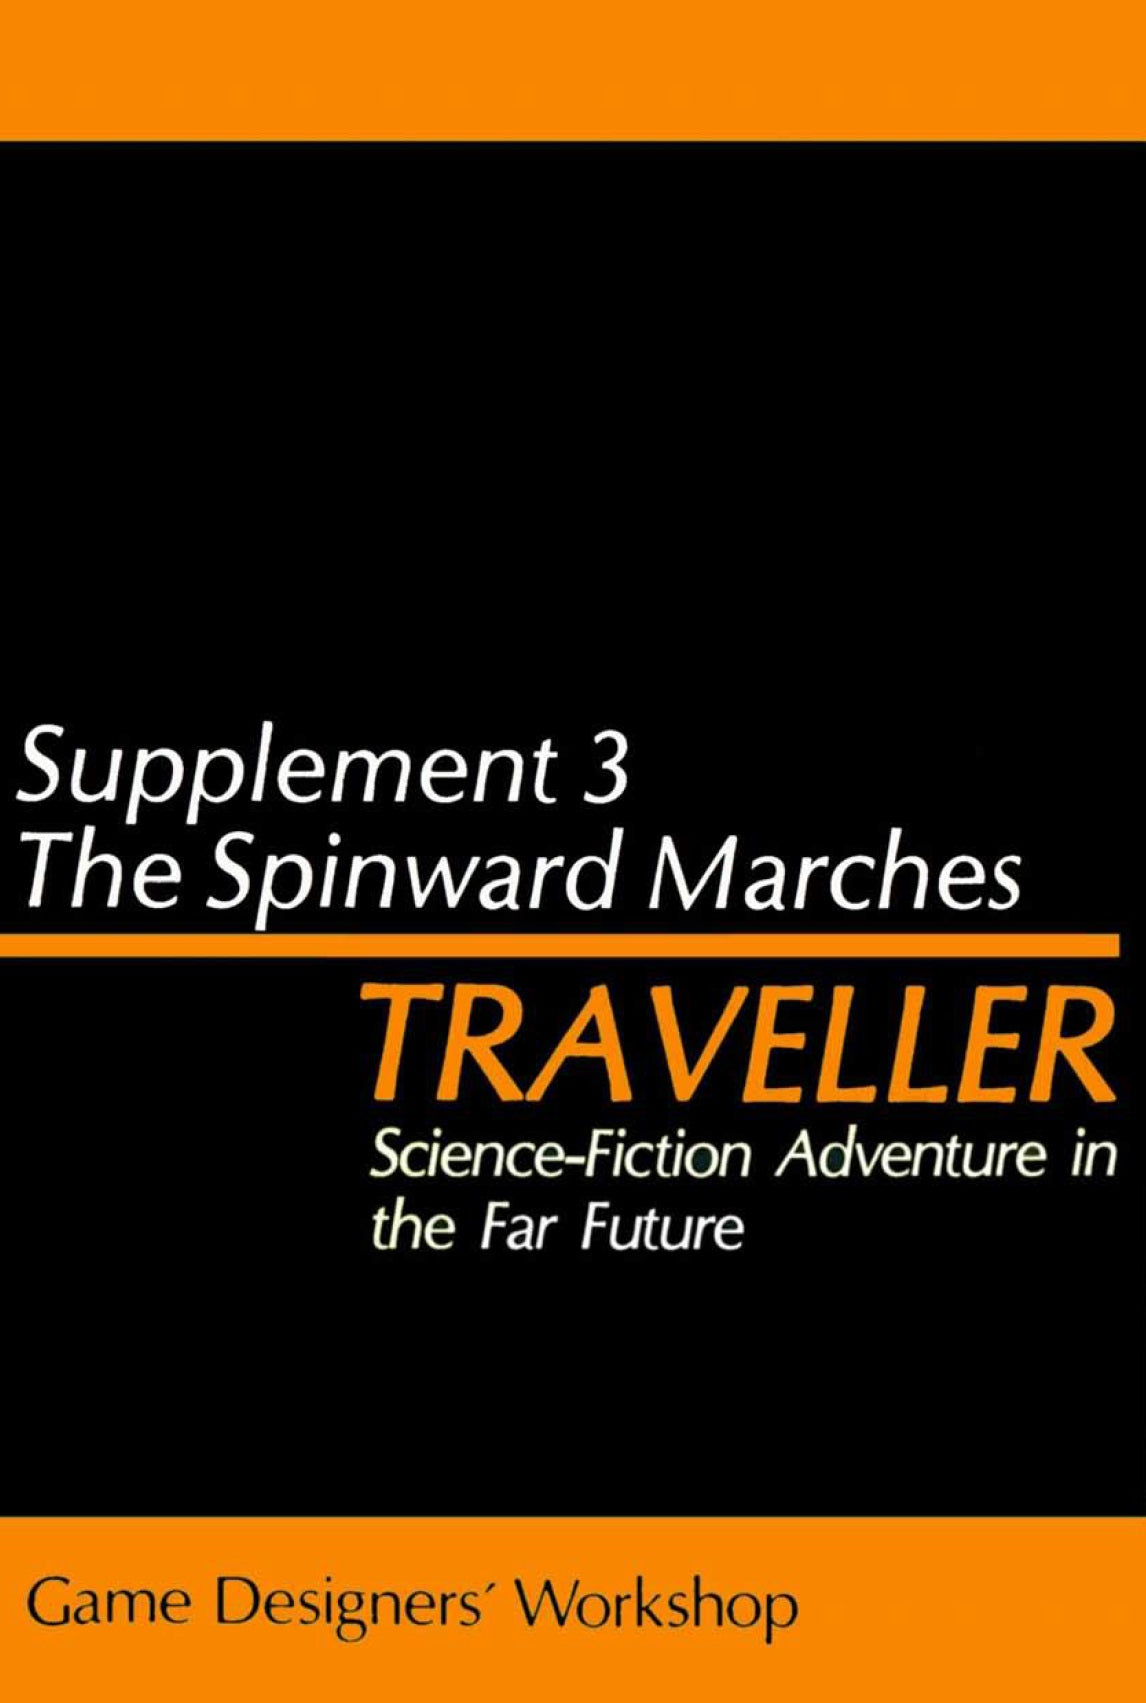 Supplement 3: The Spinward Marches ebook